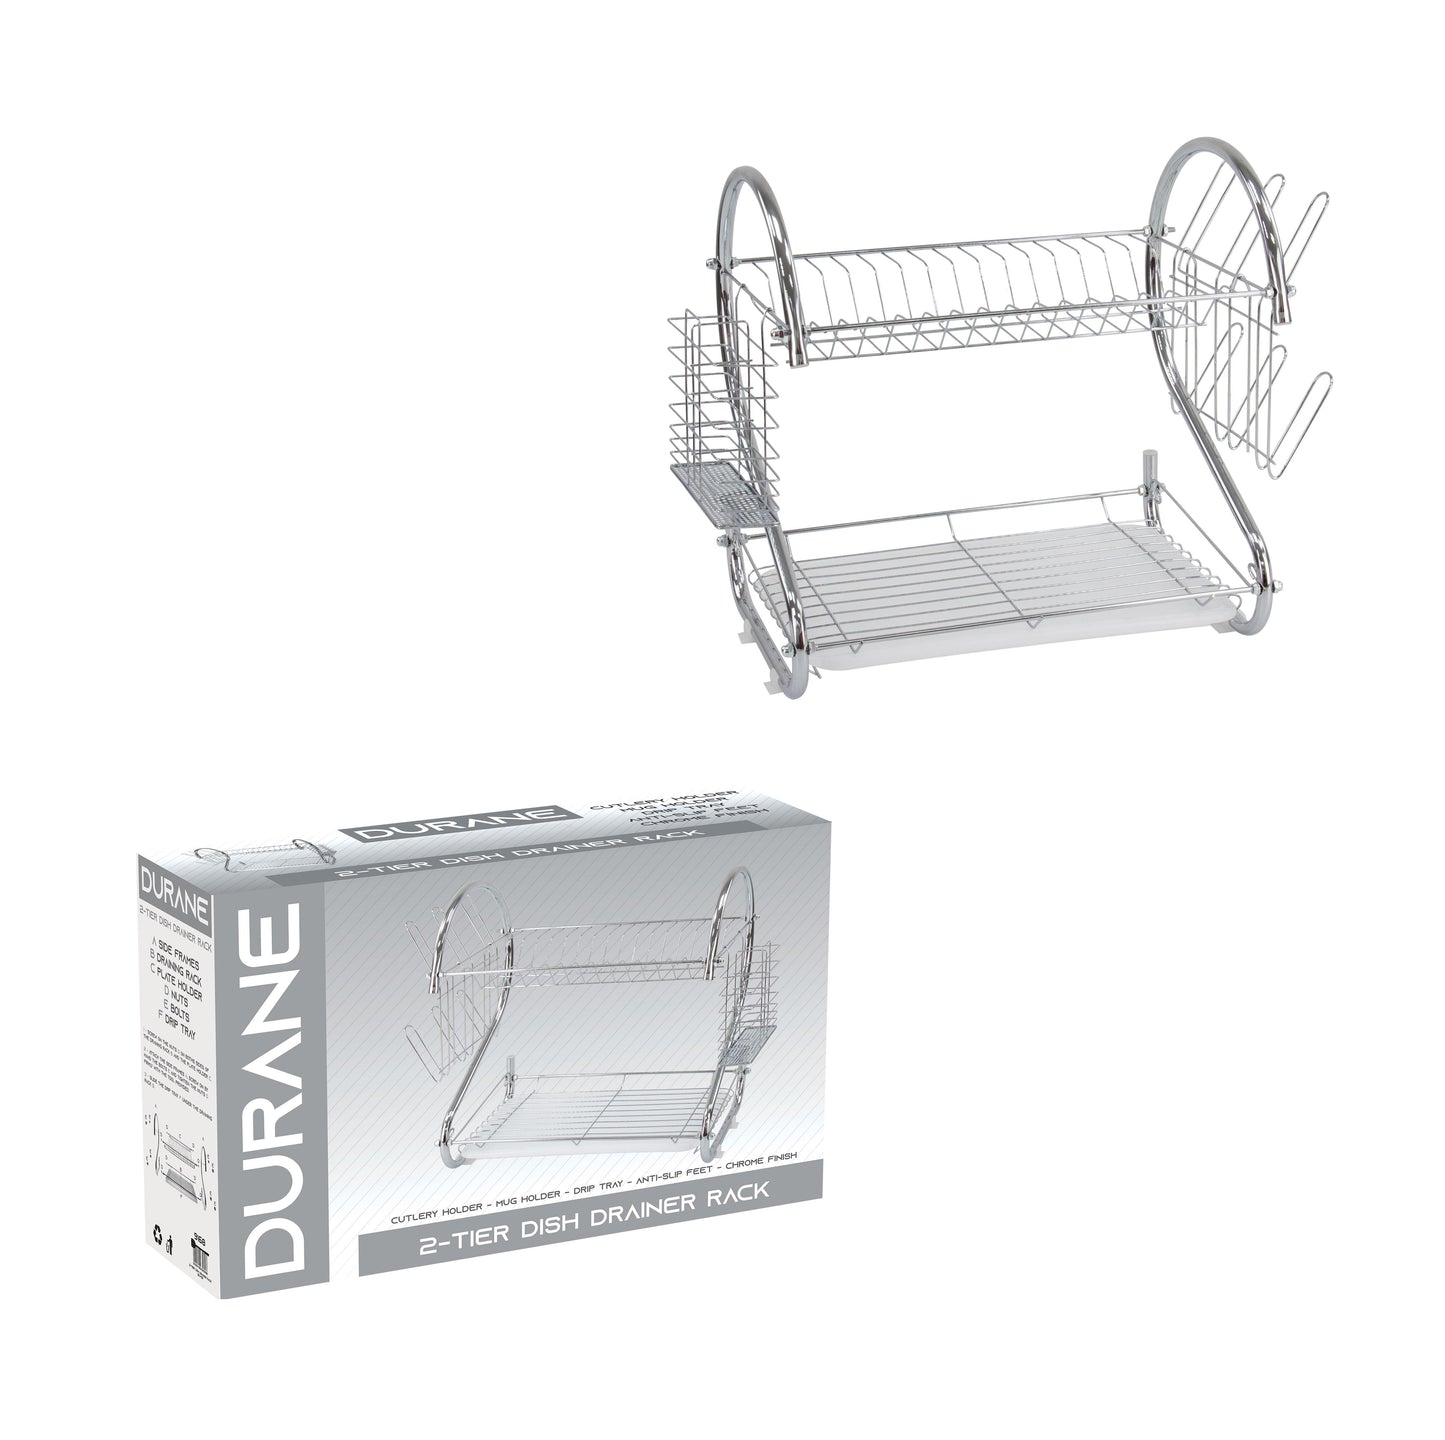 2 Tier Dish Drainer Rack With Cutlery Rack Holds Plates Mugs Cups Anti Slip Chrome Finish 9168 (Parcel Rate)